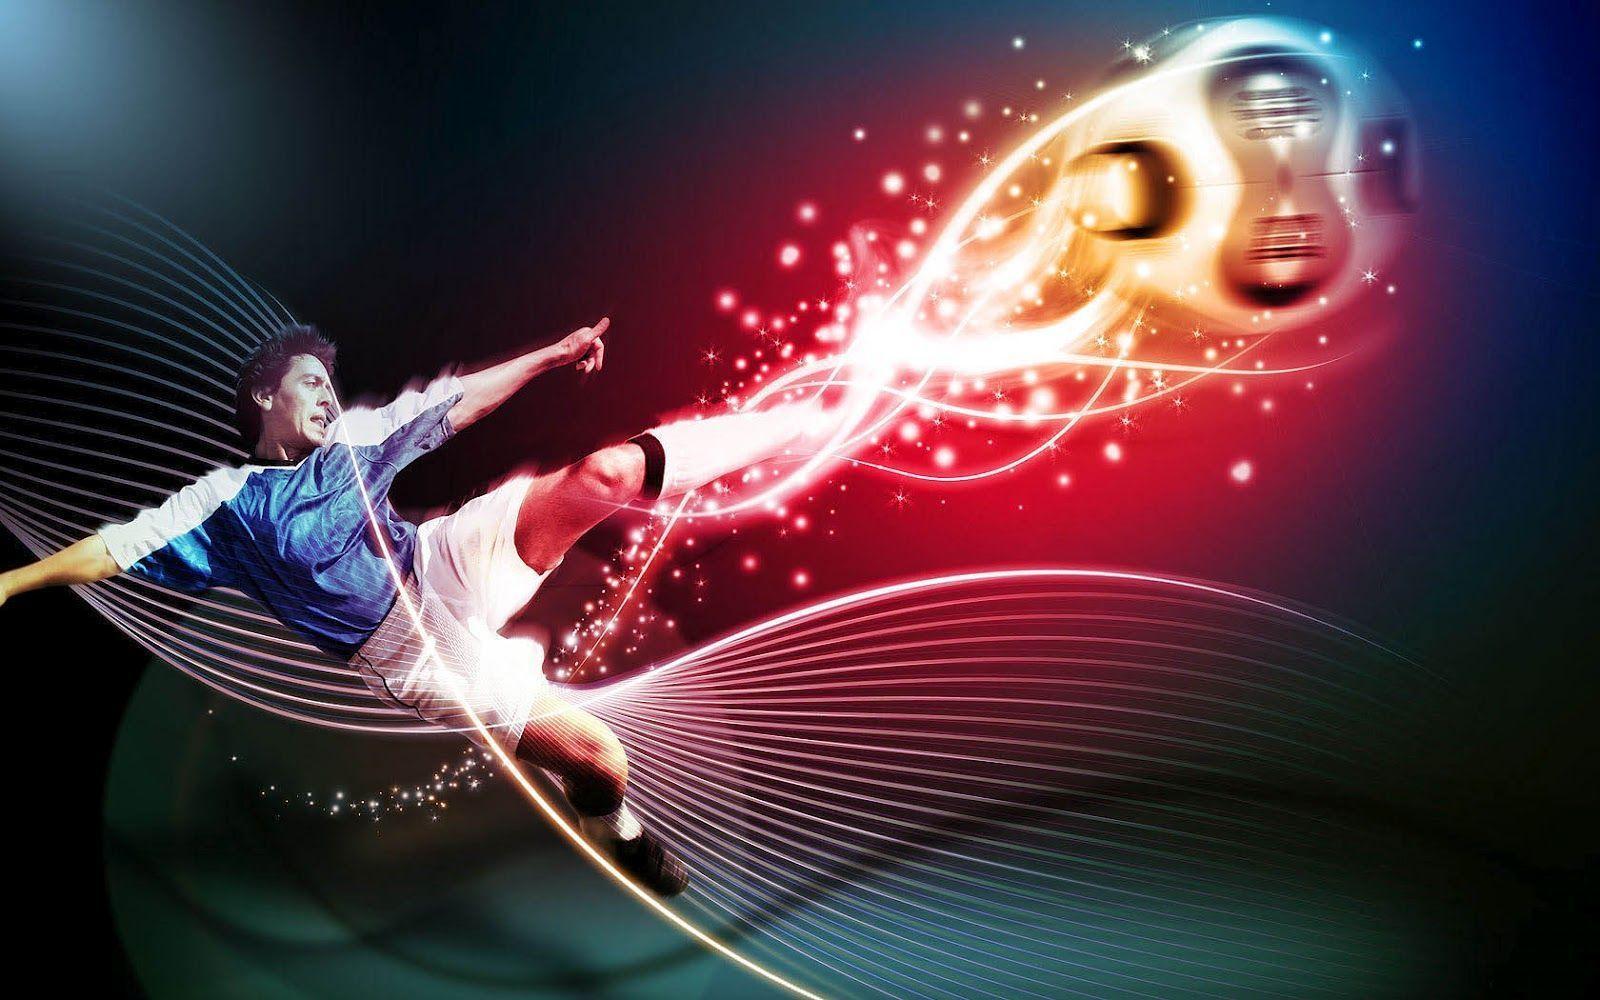 Best Sports Wallpapers